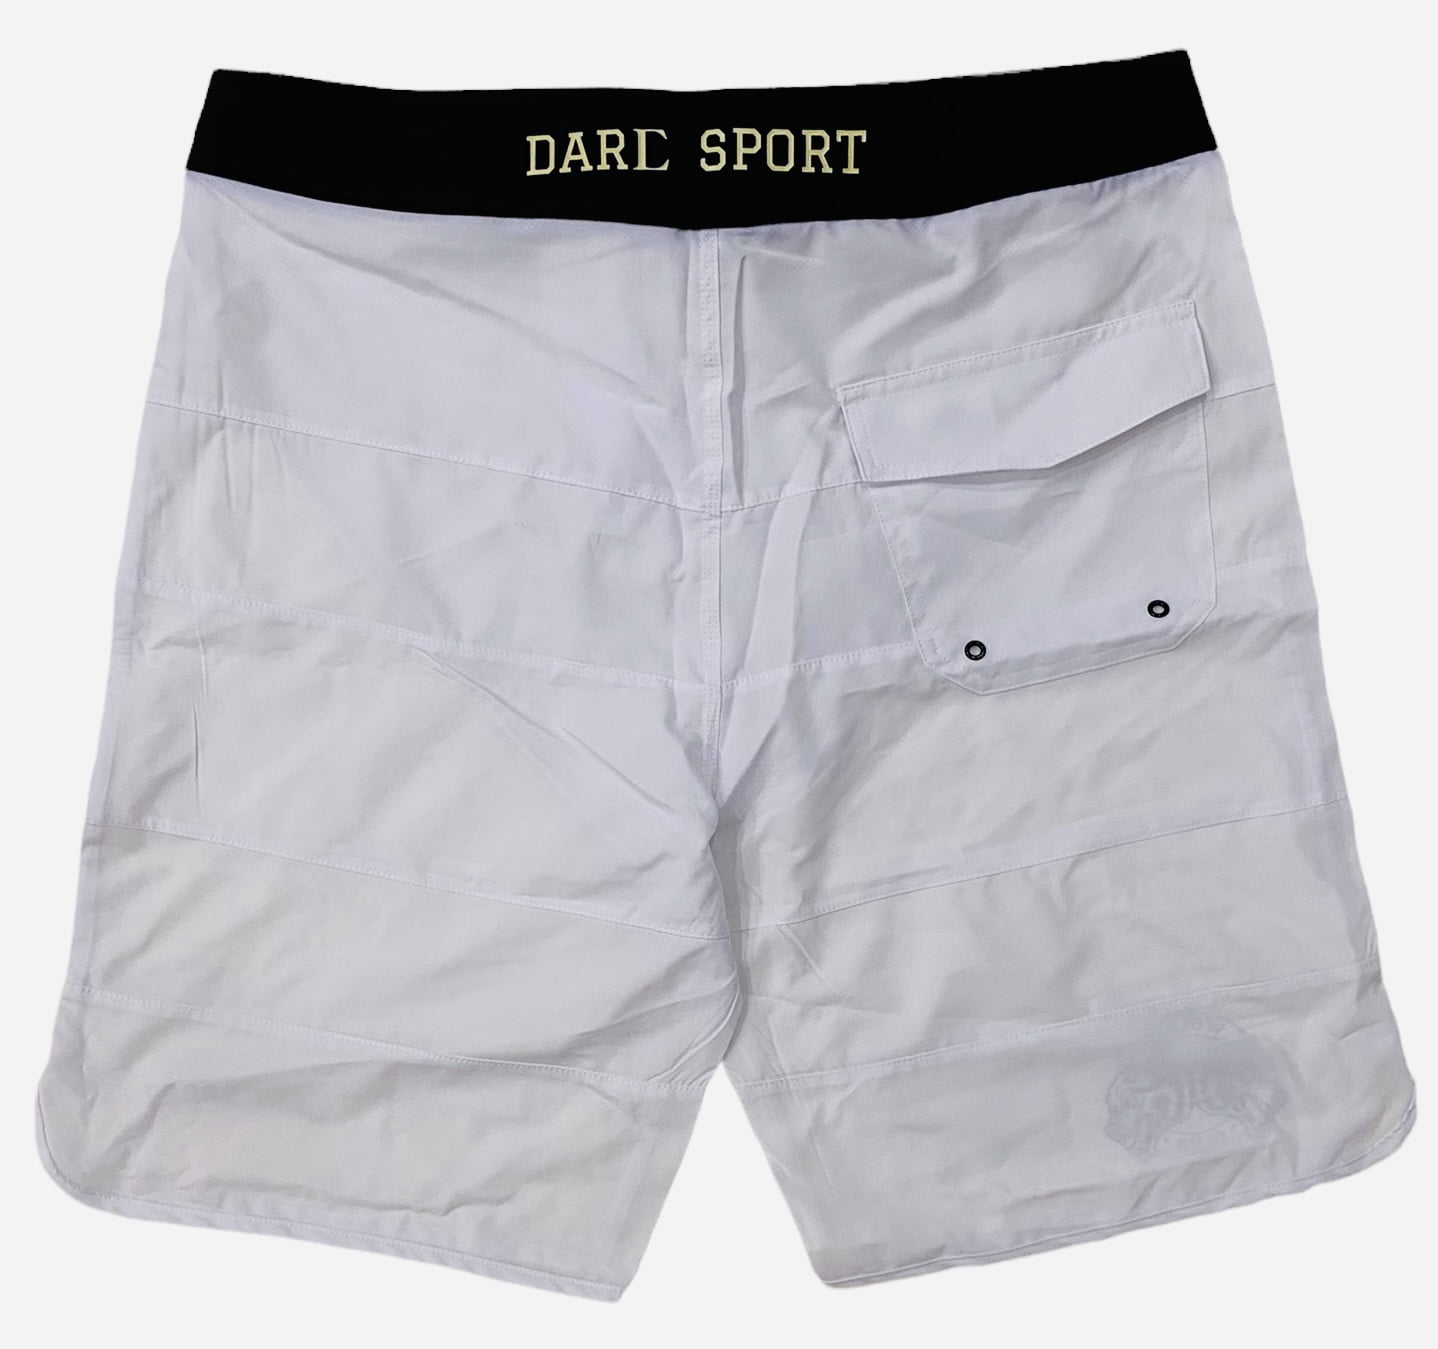 Darc Sport Men's Vicious Ones Stage Shorts Boardshorts With Inner Mesh  Liner (34, White/Black)